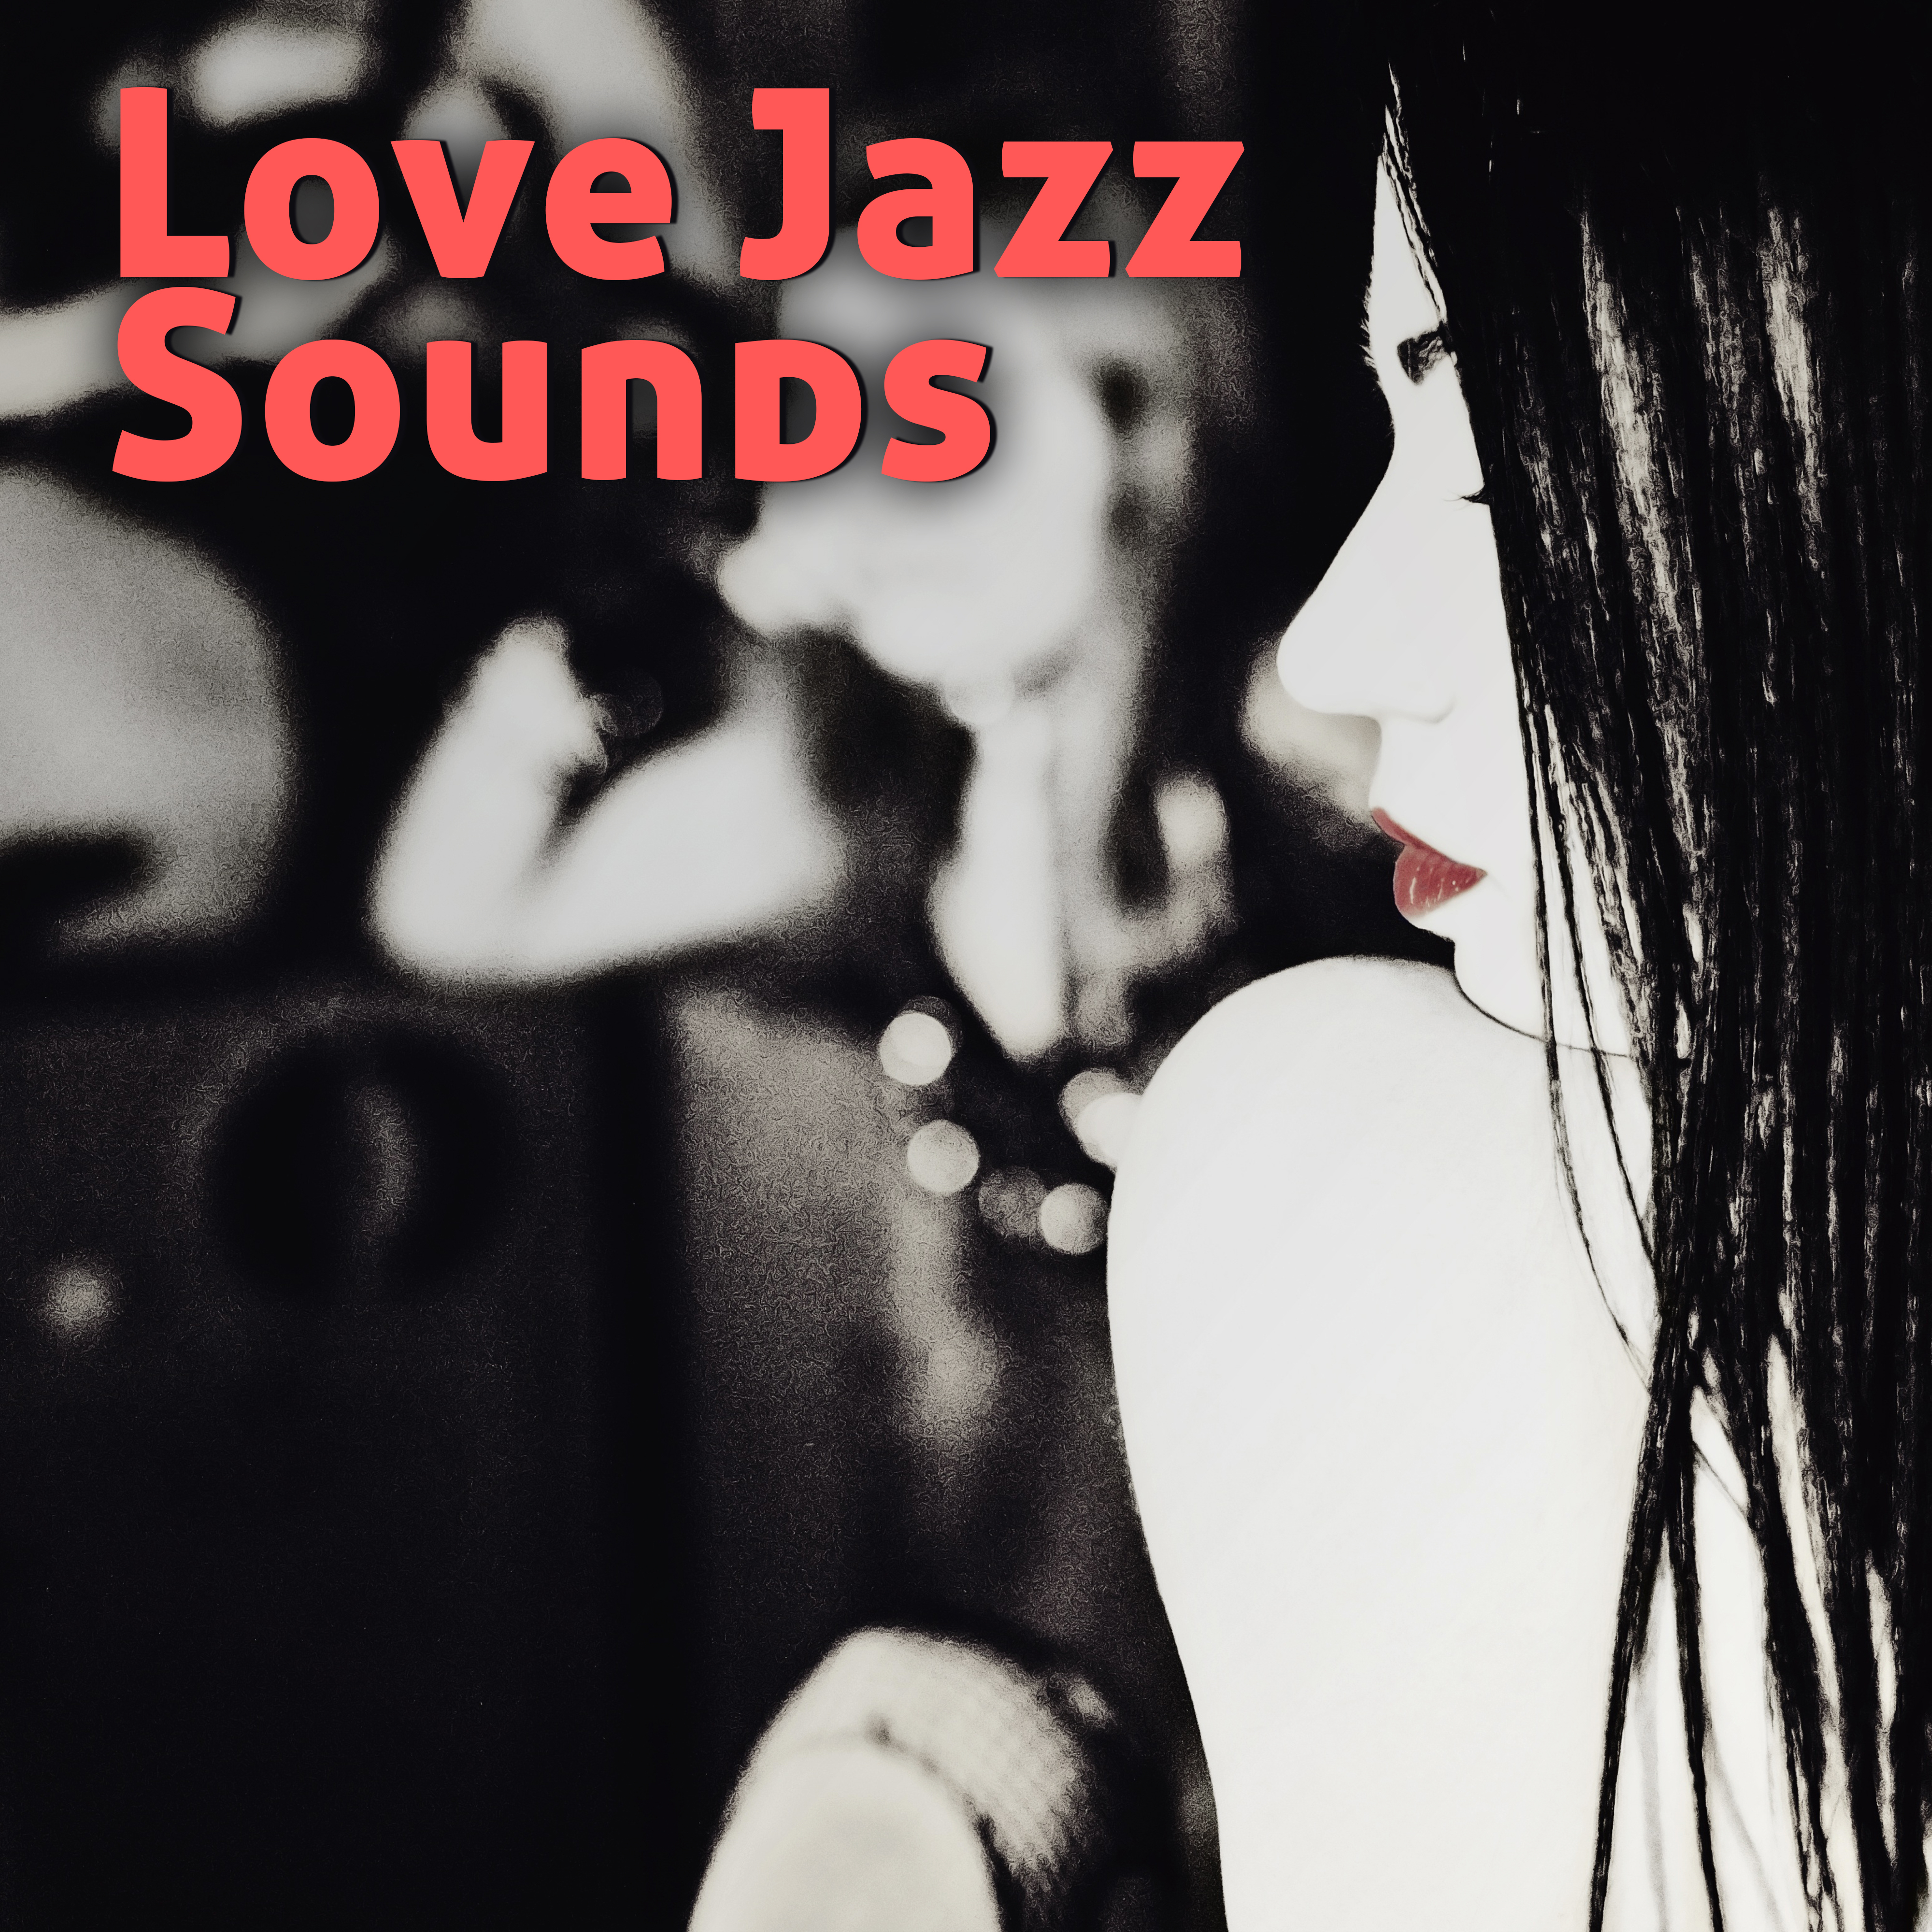 Love Jazz Sounds – Soothing Jazz, Music to Relax, Piano Sounds, Moonlight Note